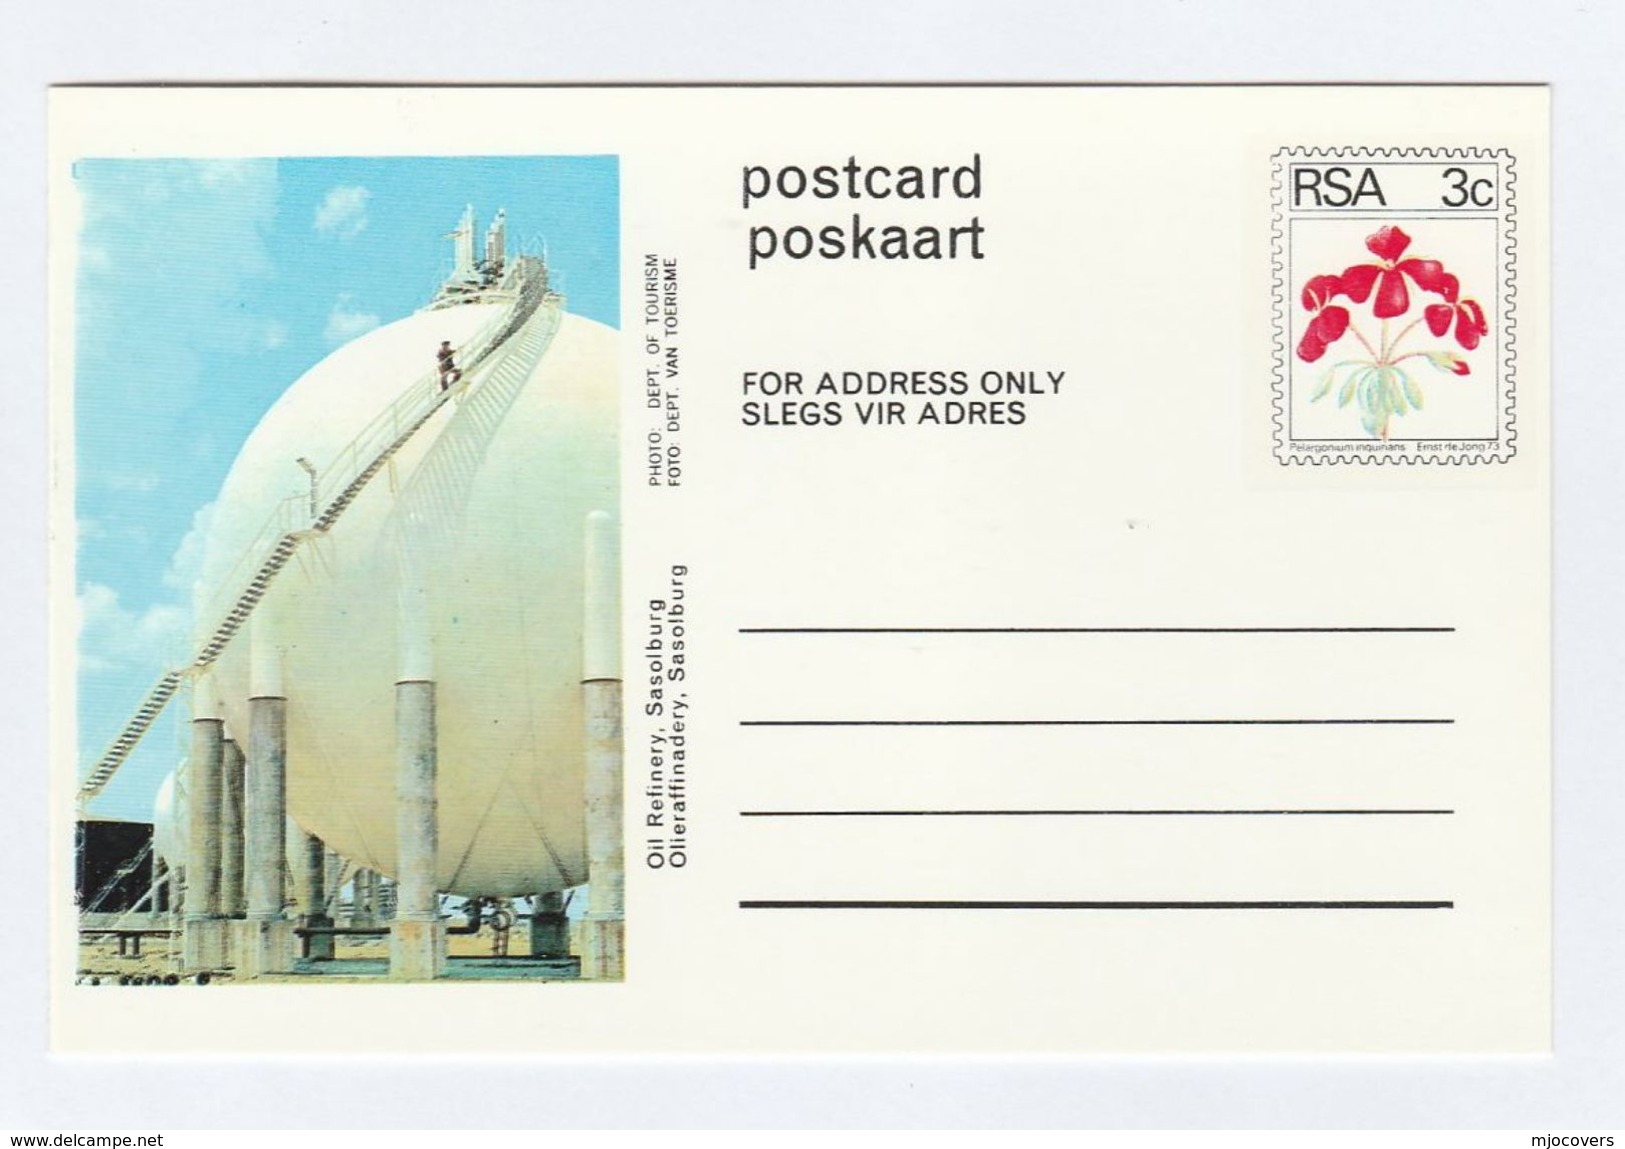 1973 SOUTH AFRICA STATIONERY Illus SASOLBURG OIL REFINERY   Rsa Stamps Postal Card Cover Energy - Oil